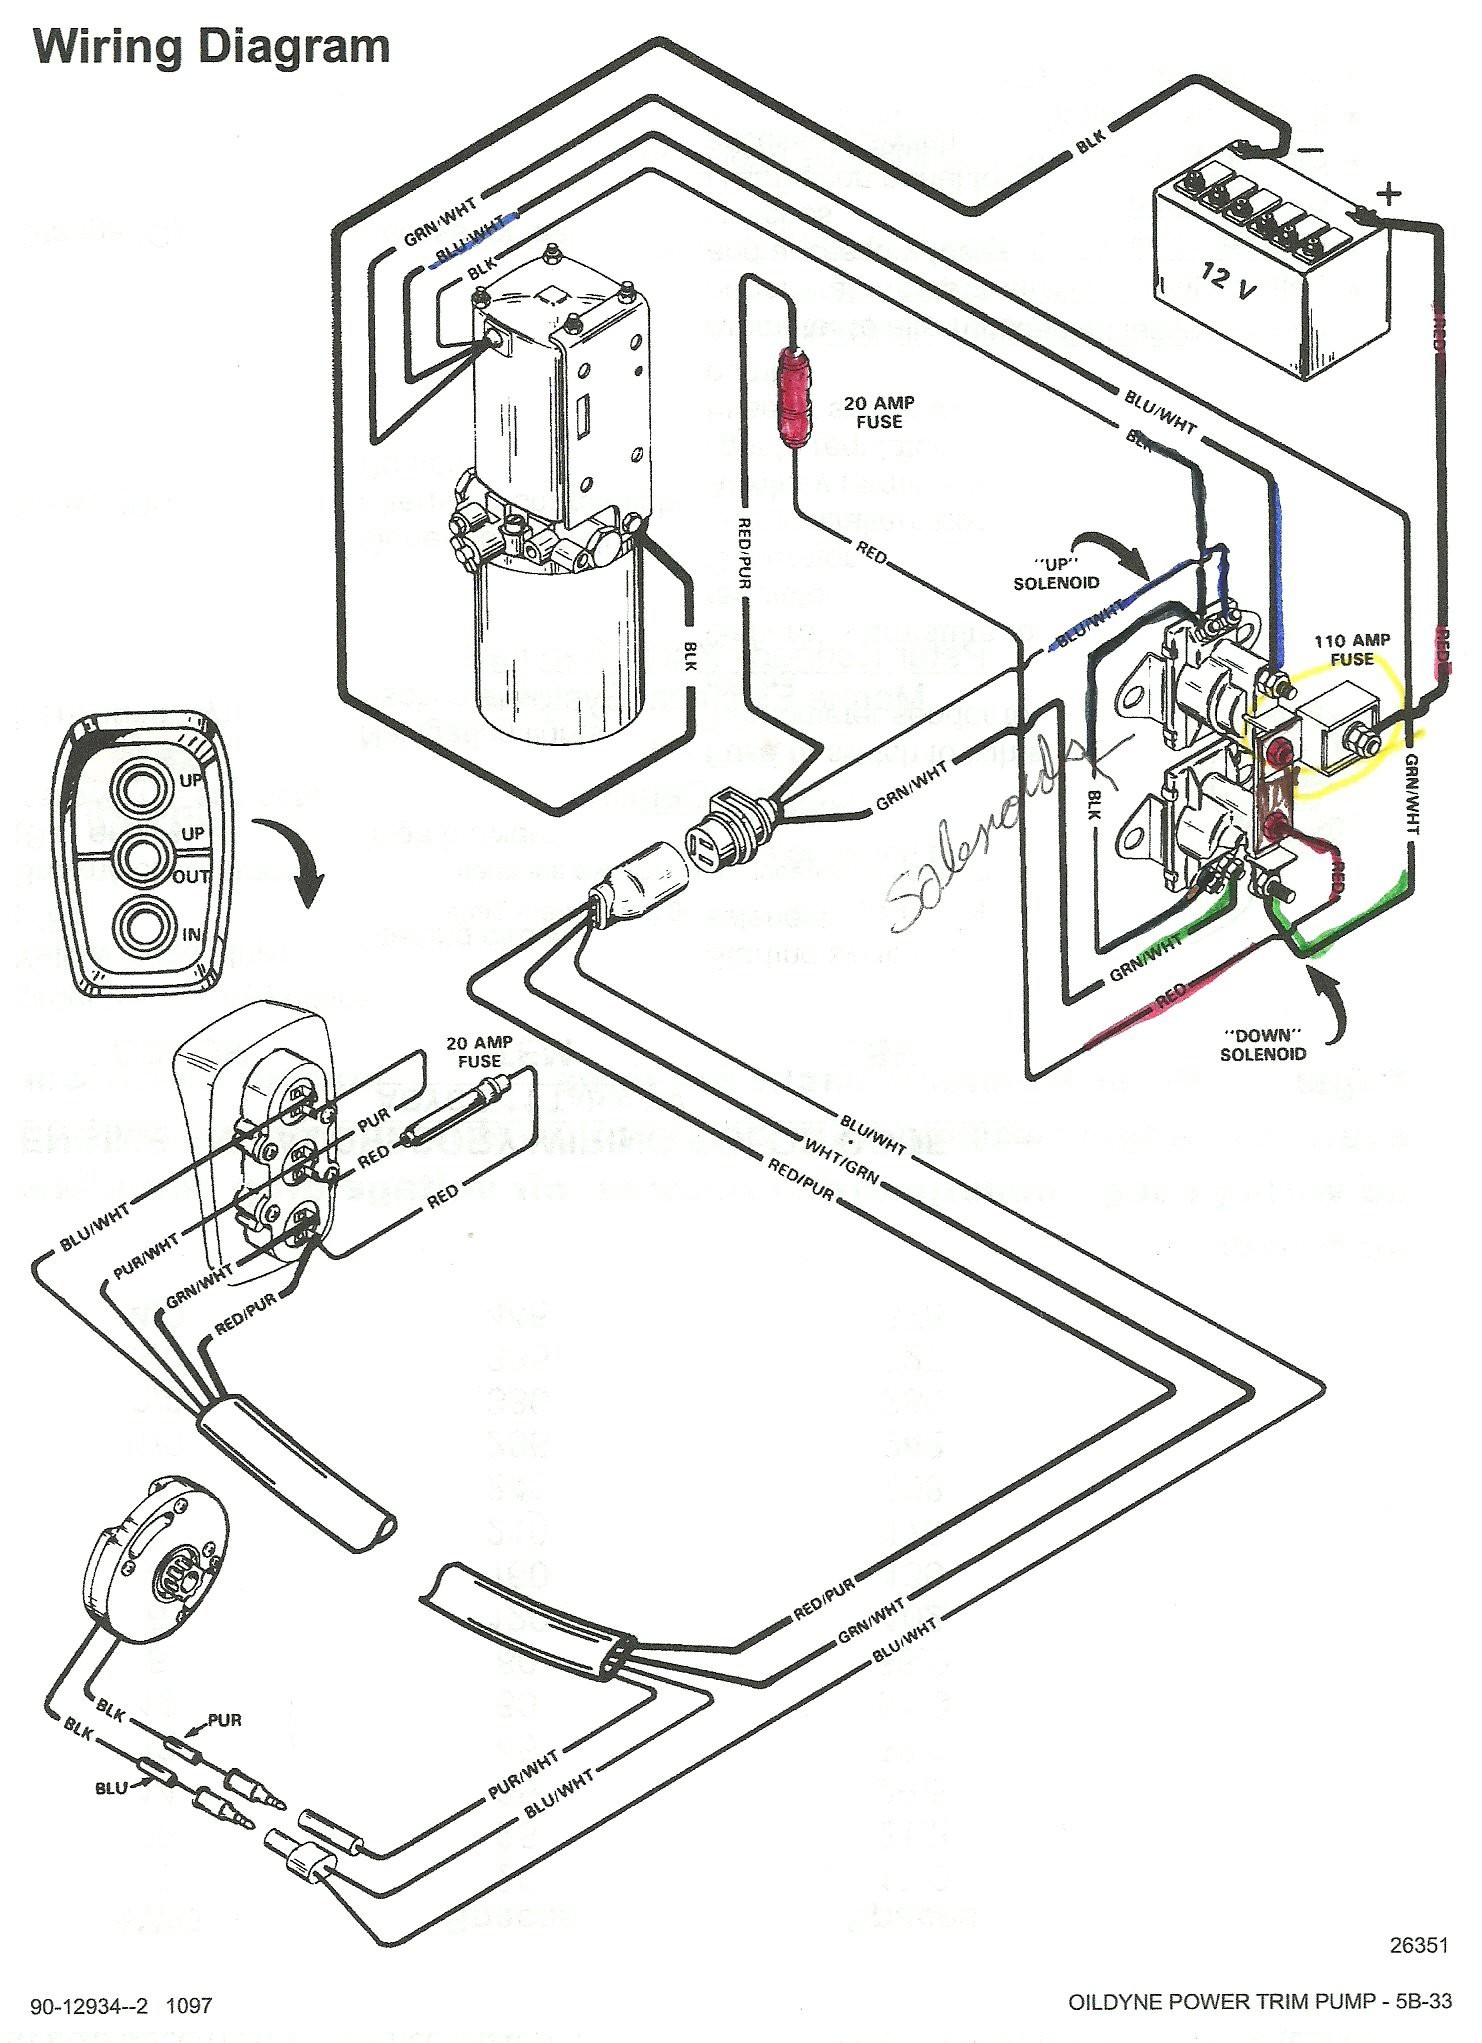 Tilt and Trim Switch Wiring Diagram Awesome Power Trim Wiring Tilt and Trim Switch Wiring